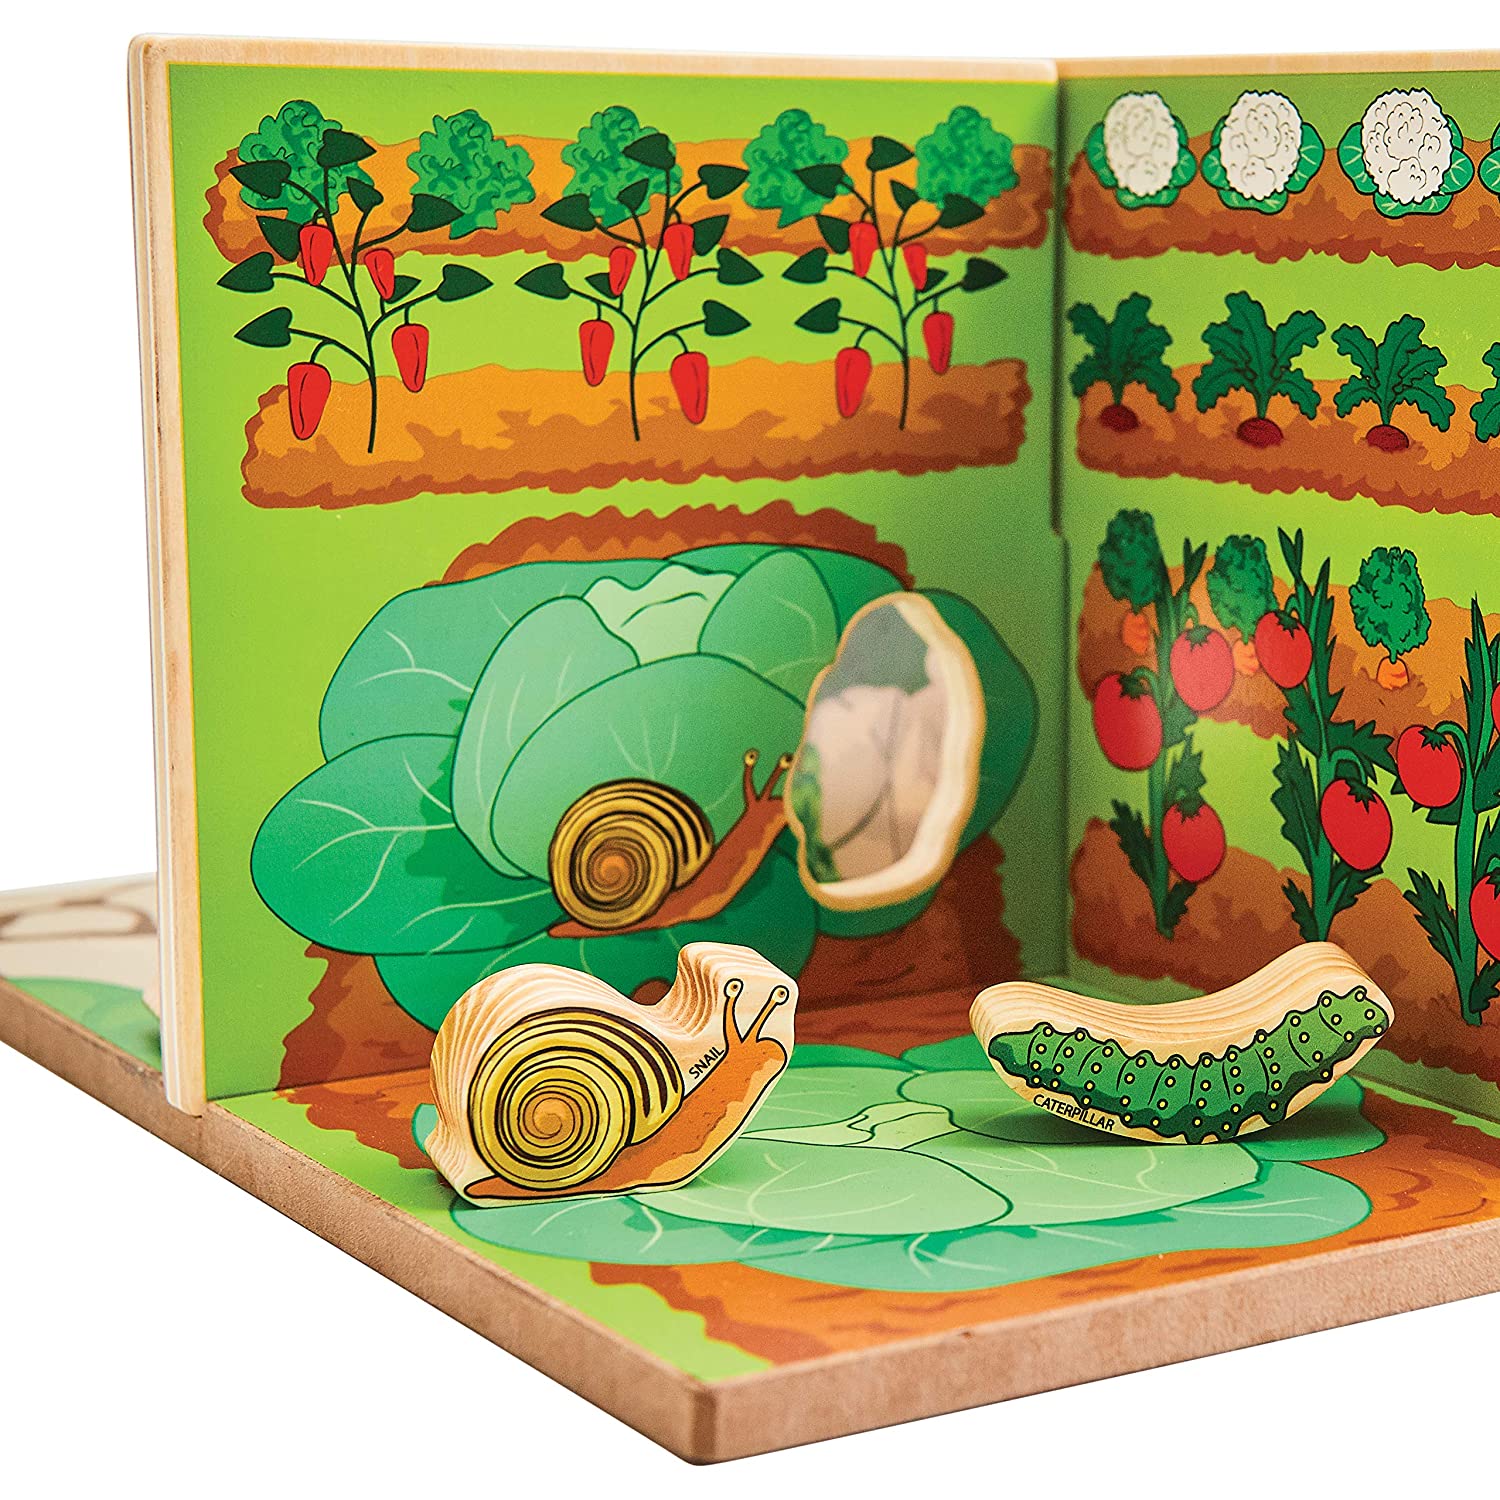 Pretend ’N’ Play Happy Minibeasts- Pretend ’n’ Play Happy Minibeasts,children's wooden toys,children's imaginative play ideas,Introducing the ultimate educational toy for curious young minds - the interactive minibeast scene set! This engaging and playful set includes 6 different interconnecting scenes, featuring a variety of fascinating minibeasts such as caterpillars, beetles, spiders, and worms, to name just a few. Your child will love learning all about the bugs in their environment while exploring the 